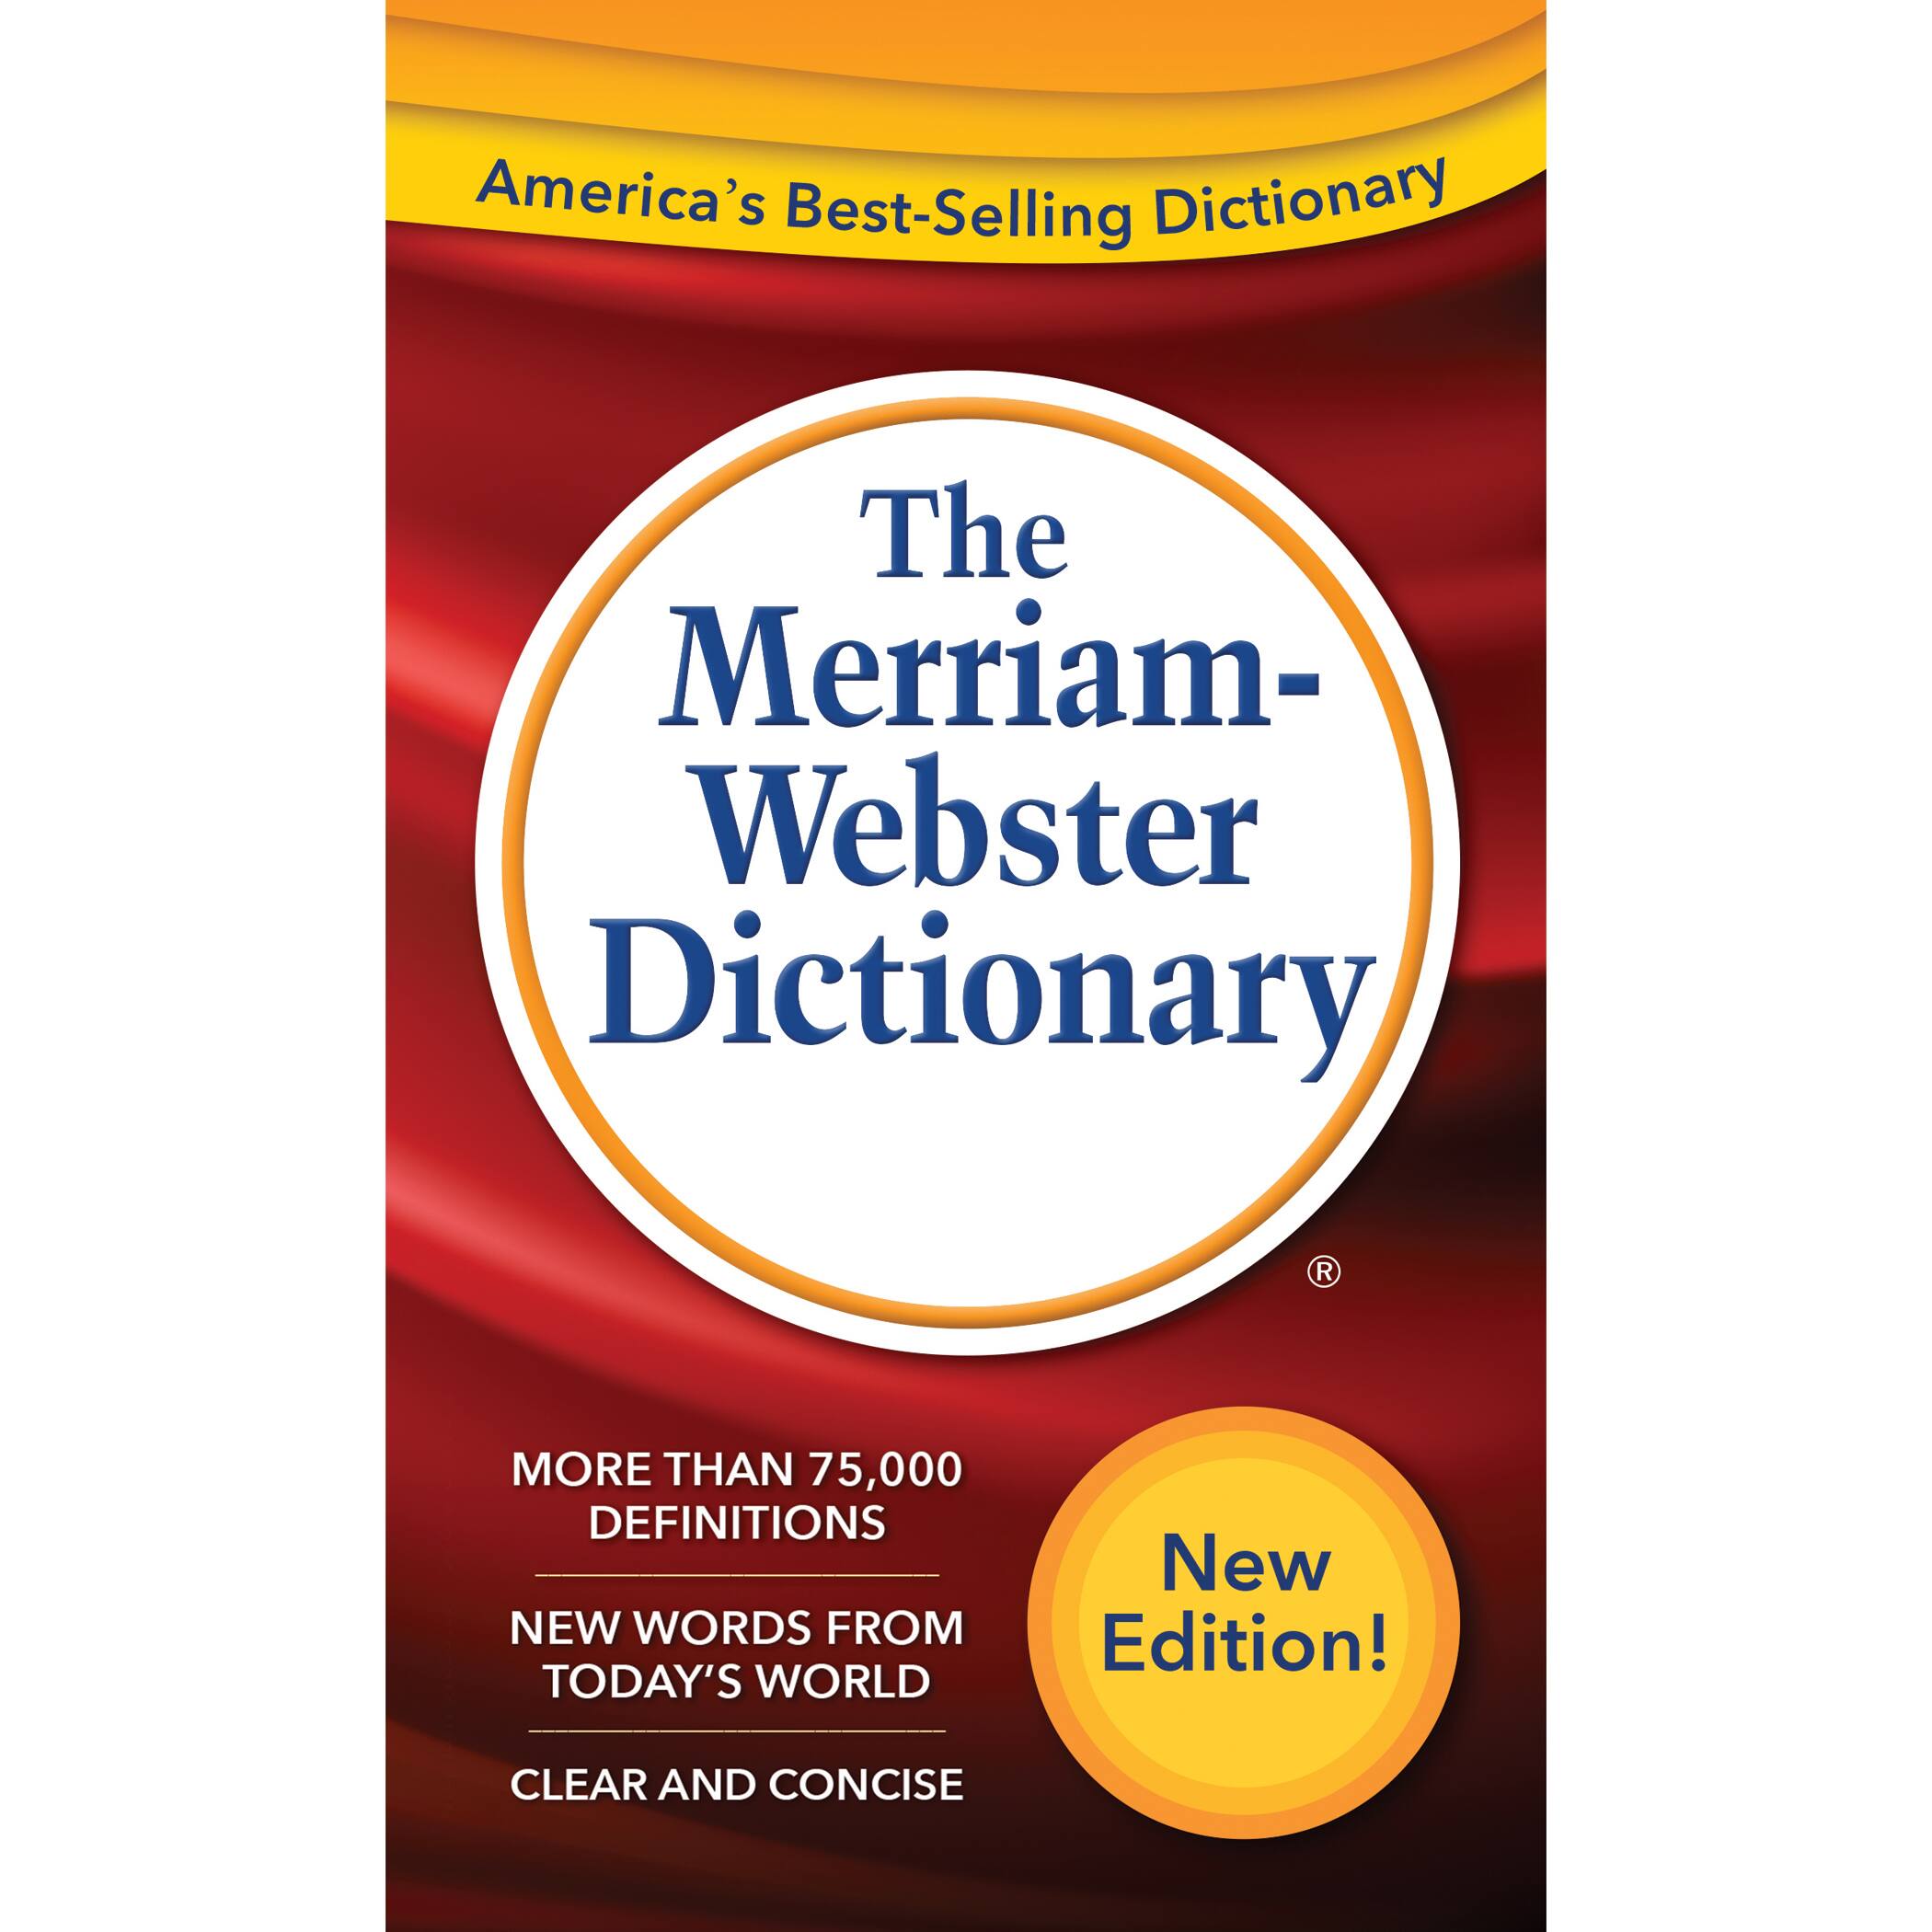 purchase-the-the-merriam-webster-dictionary-at-michaels